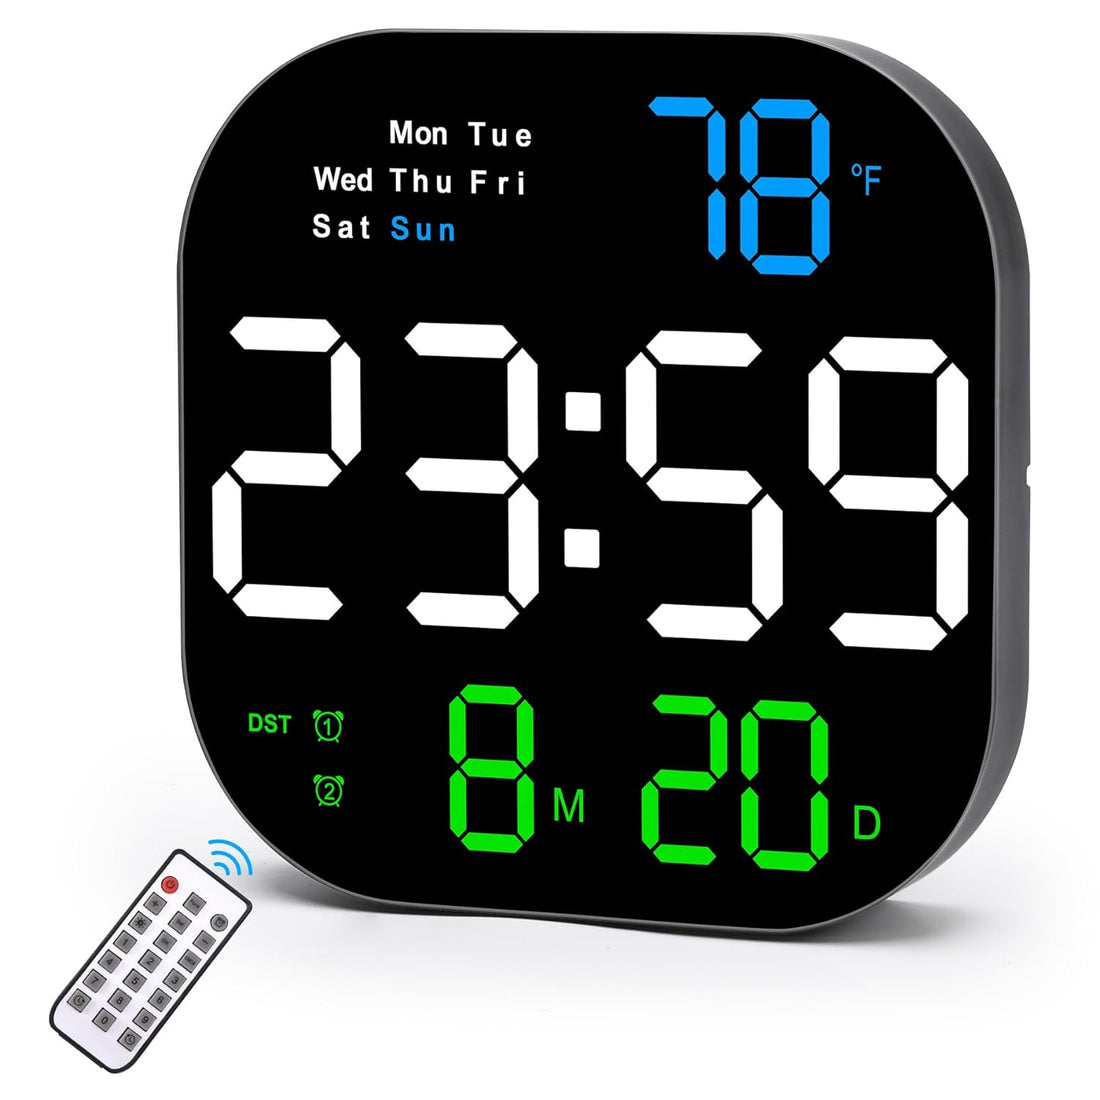 SZELAM Digital Wall Clock, 10.5” LED Digital Alarm Clock Large Display with Remote Control, Date and Temperature, Auto Dimming, Day of Week, for Living Room Office Bedroom Decor Elderly - Mixed